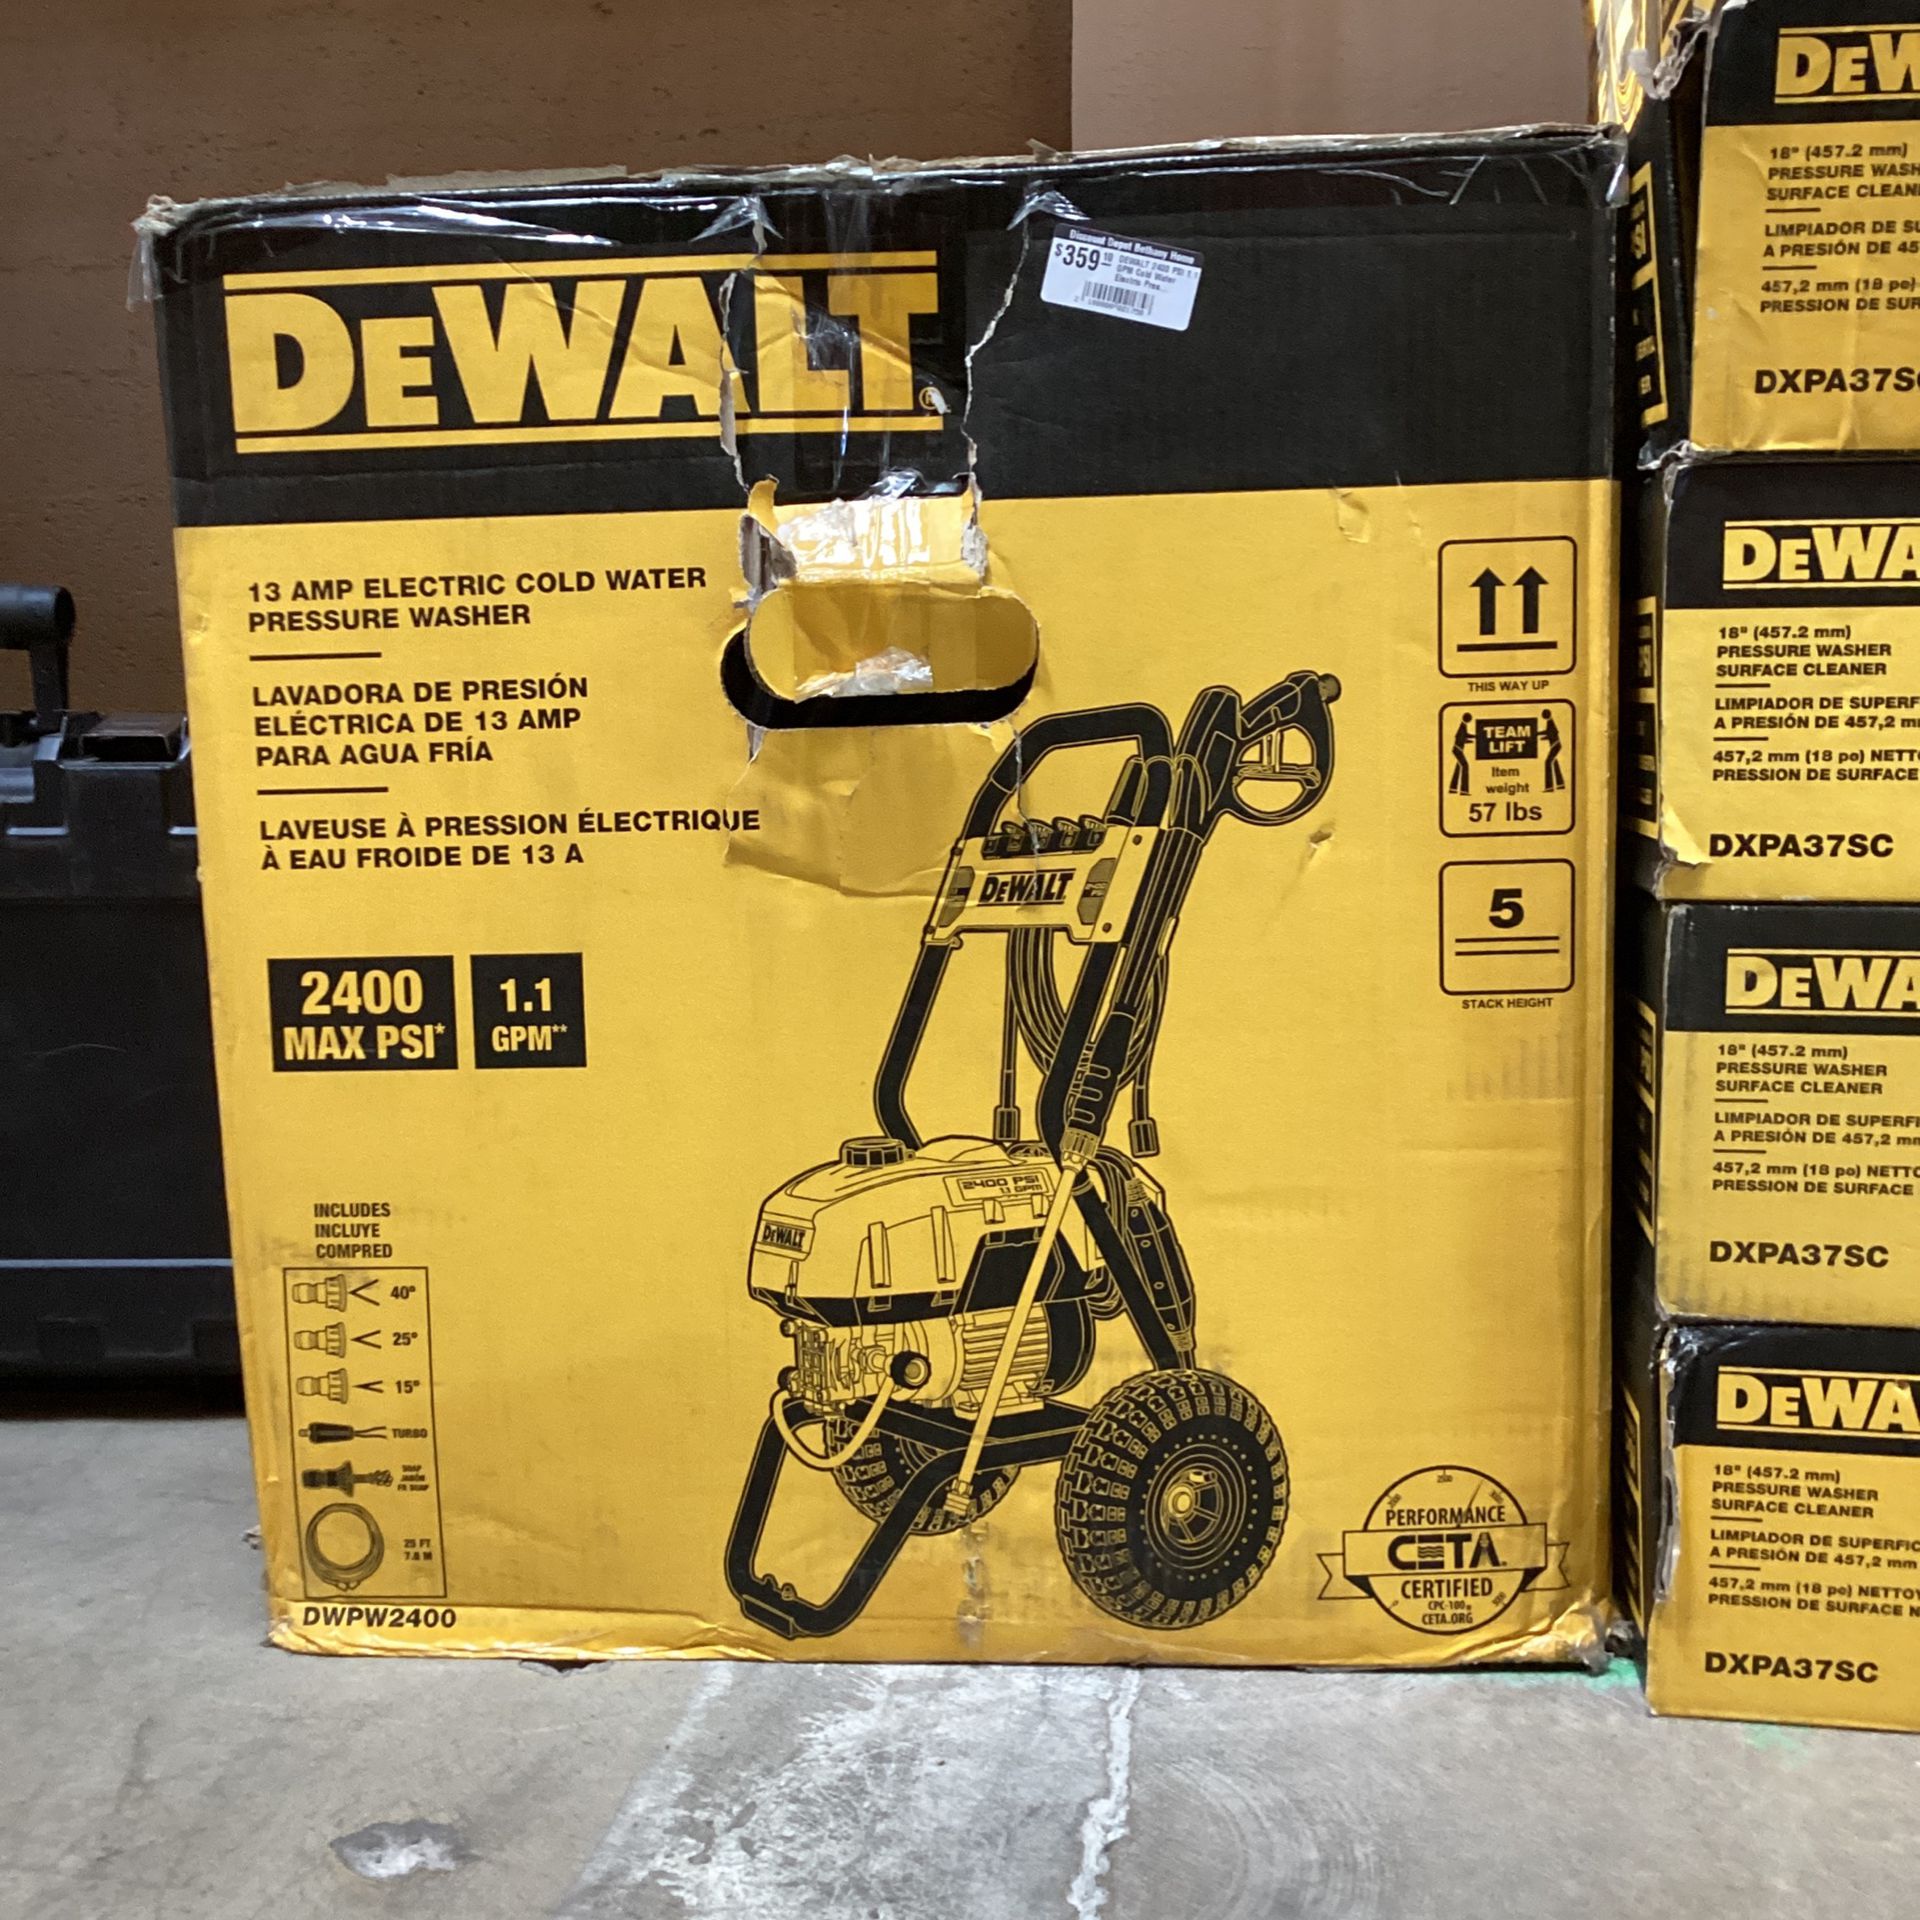 (New) DEWALT 2400 PSI 1.1 GPM Cold Water Electric Pressure Washer